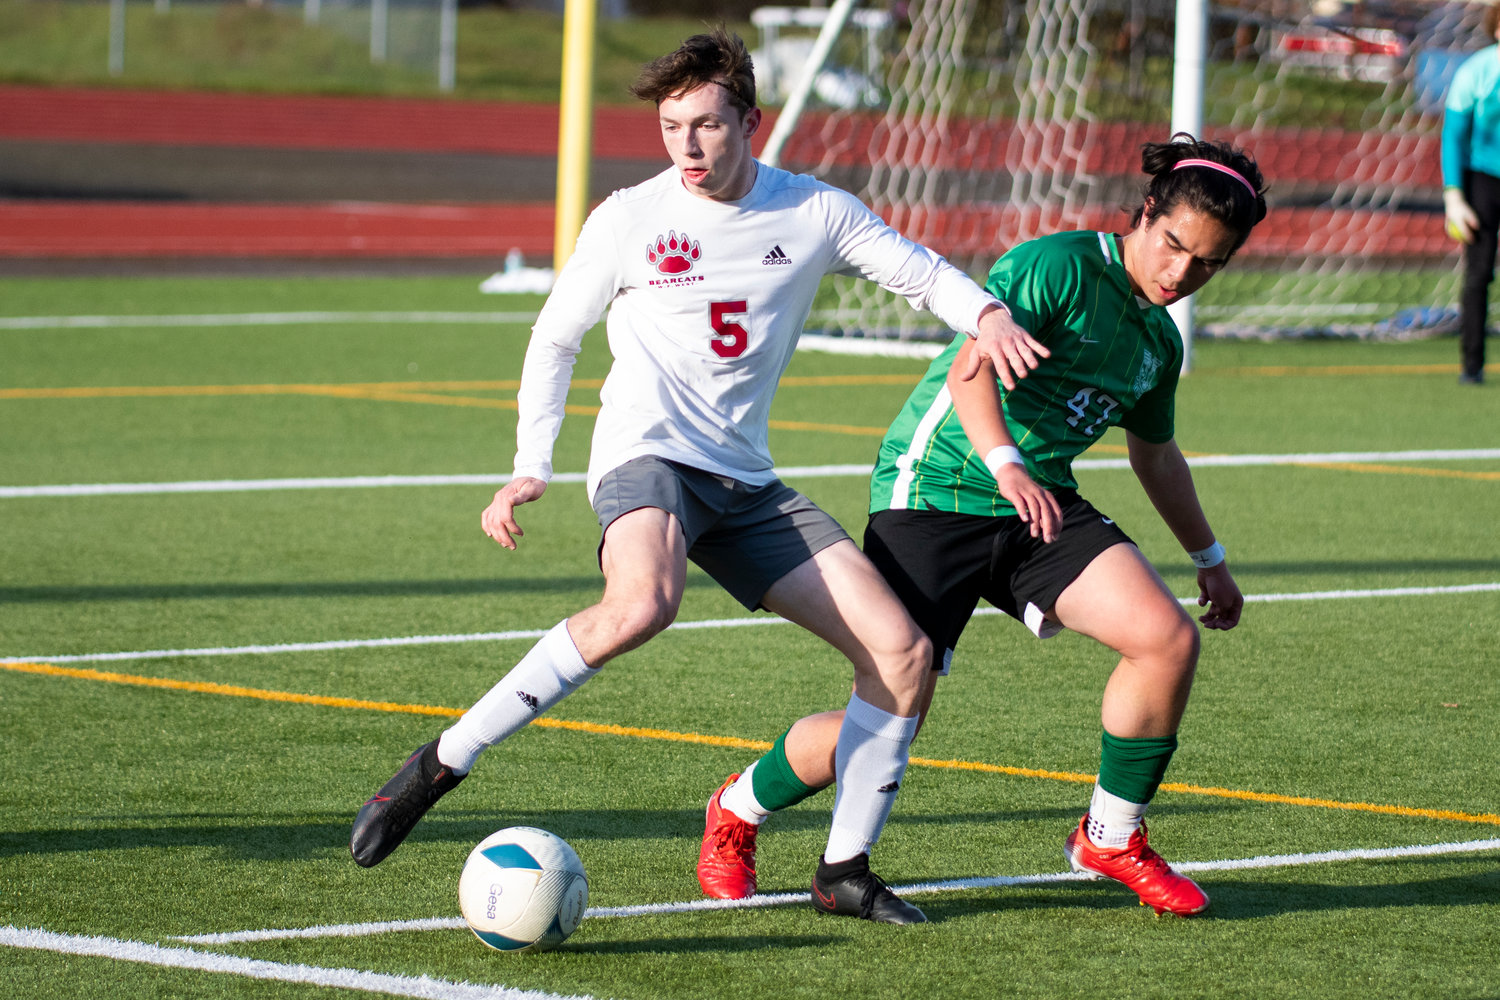 W.F. West's Cody Pennington (5) battles for the ball against Tumwater's Keegan Trubia (47) during the district semifinals on May 12.